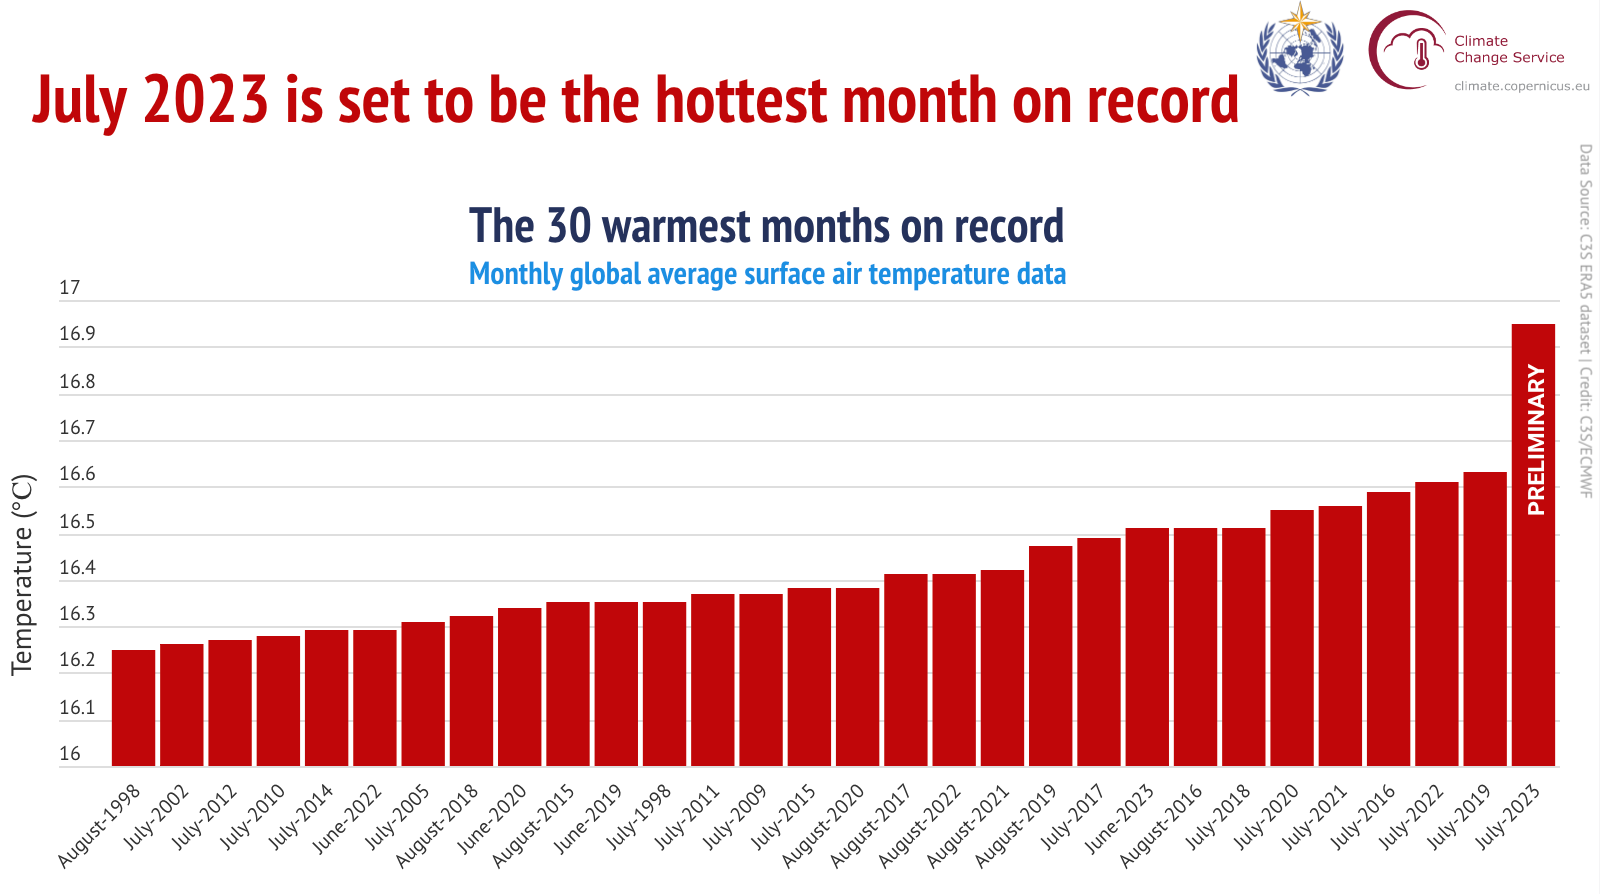 The 30 warmest months on record, by monthly global average surface air temperature. July 2023 was the hottest month on record and the warmest the Earth has been in 120,000 years, based on data collected from coral reefs, deep sea sediment cores, and tree rings. Graphic: European Commission’s Copernicus Climate Change Service